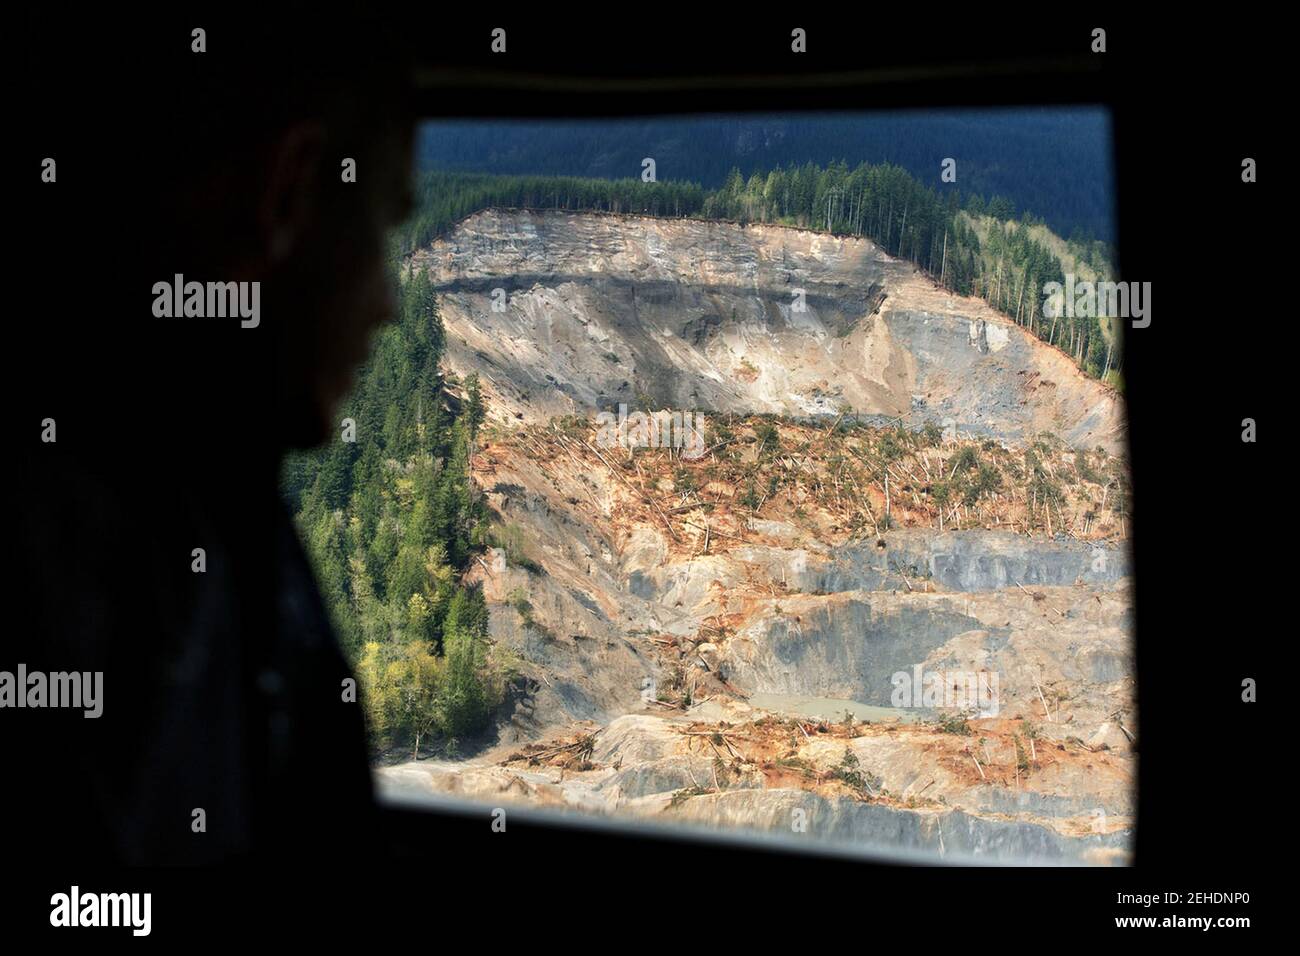 President Barack Obama views the scene of the mudslide in Oso, Wash., from Marine One, April 22, 2014. The President later met privately with families who lost loved ones and first responders. Stock Photo